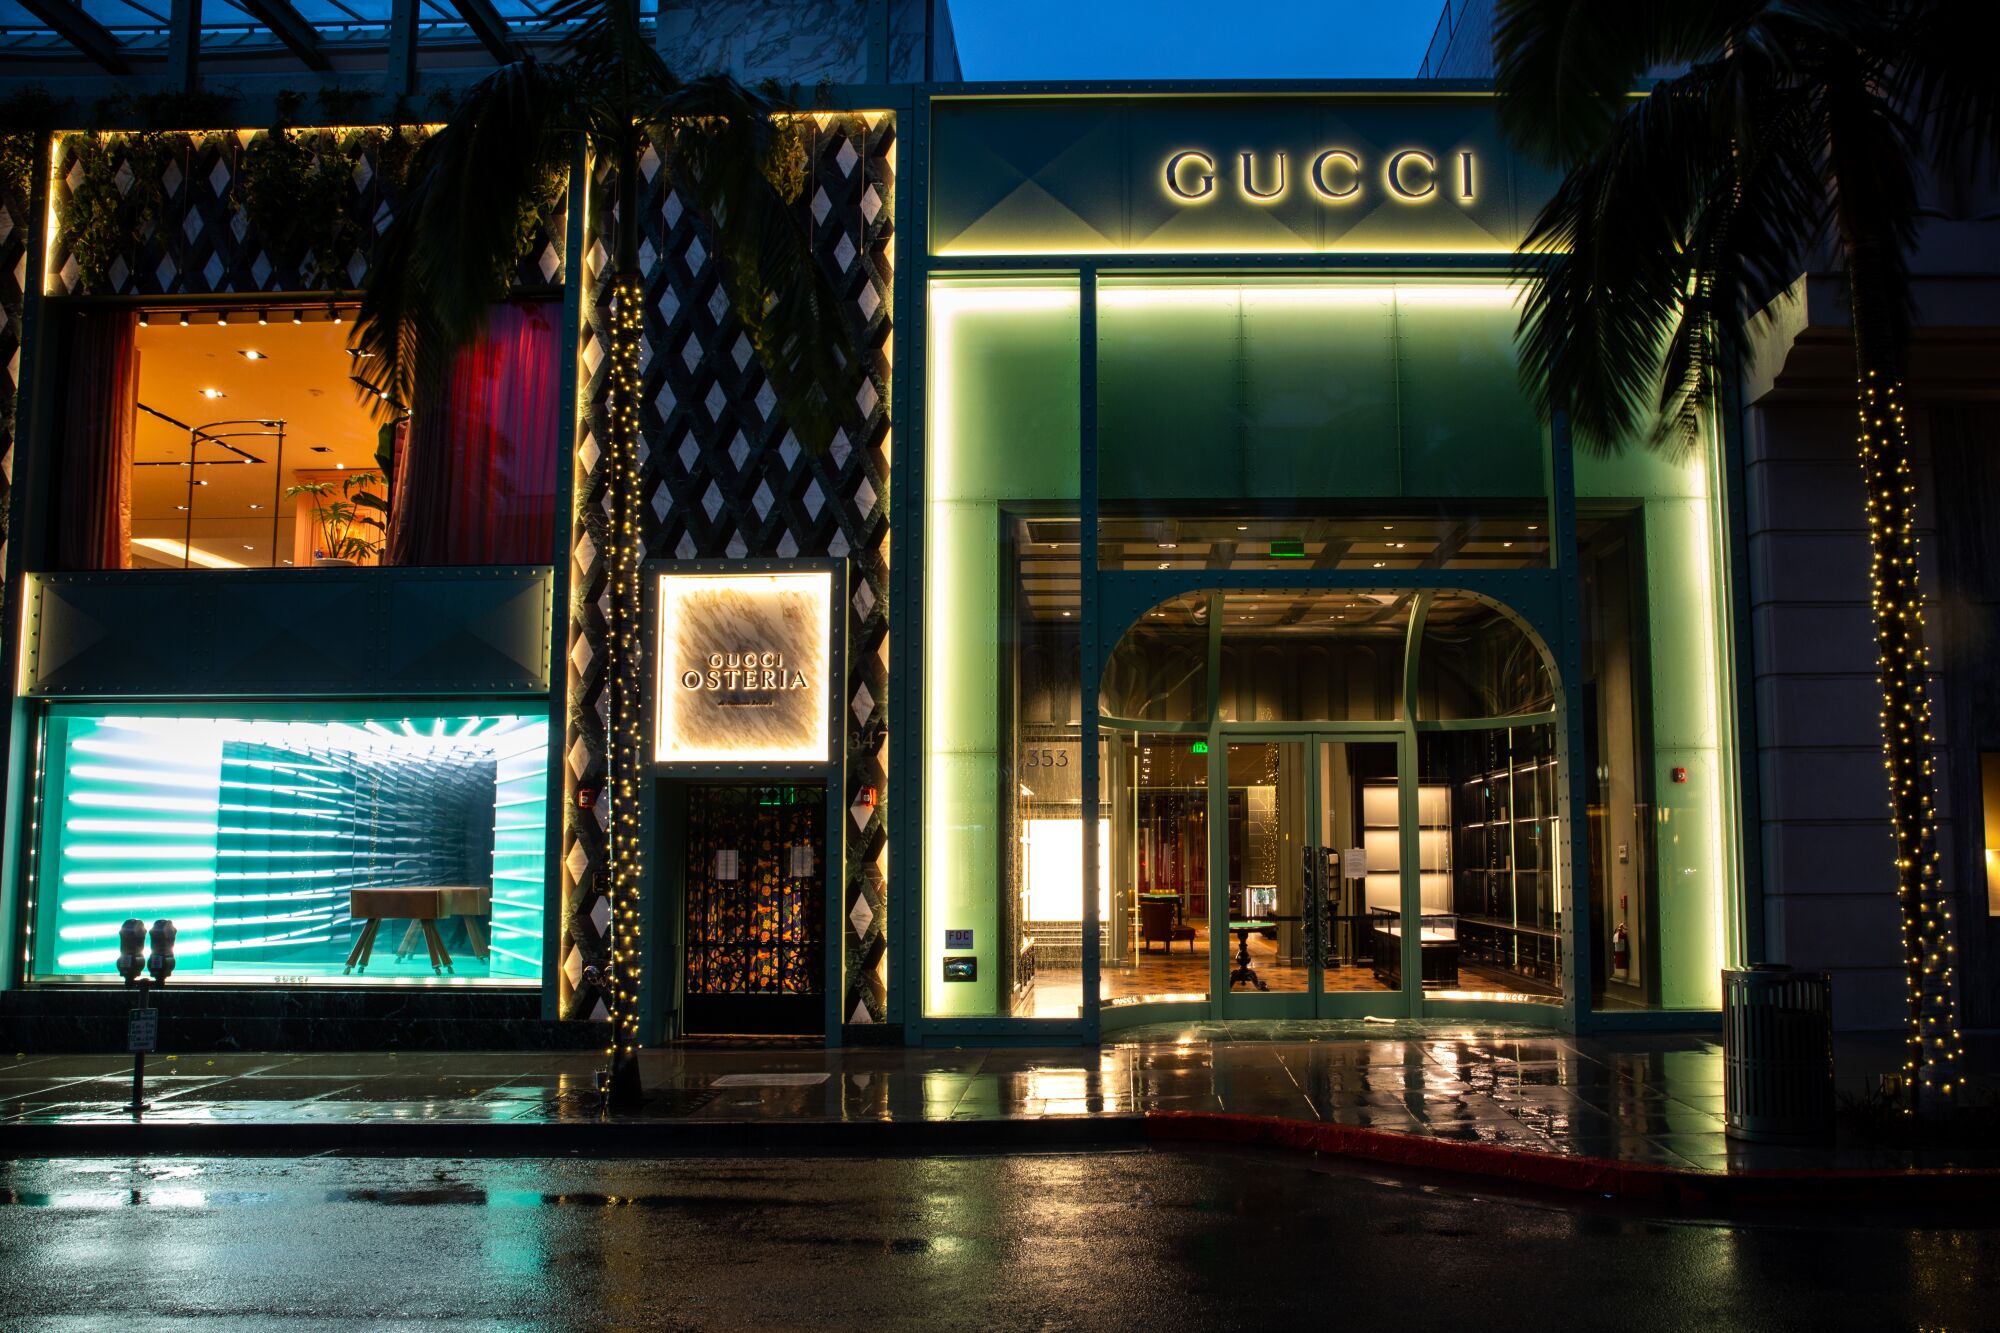 Gucci has also cleared out their store on Rodeo Drive in Beverly Hills